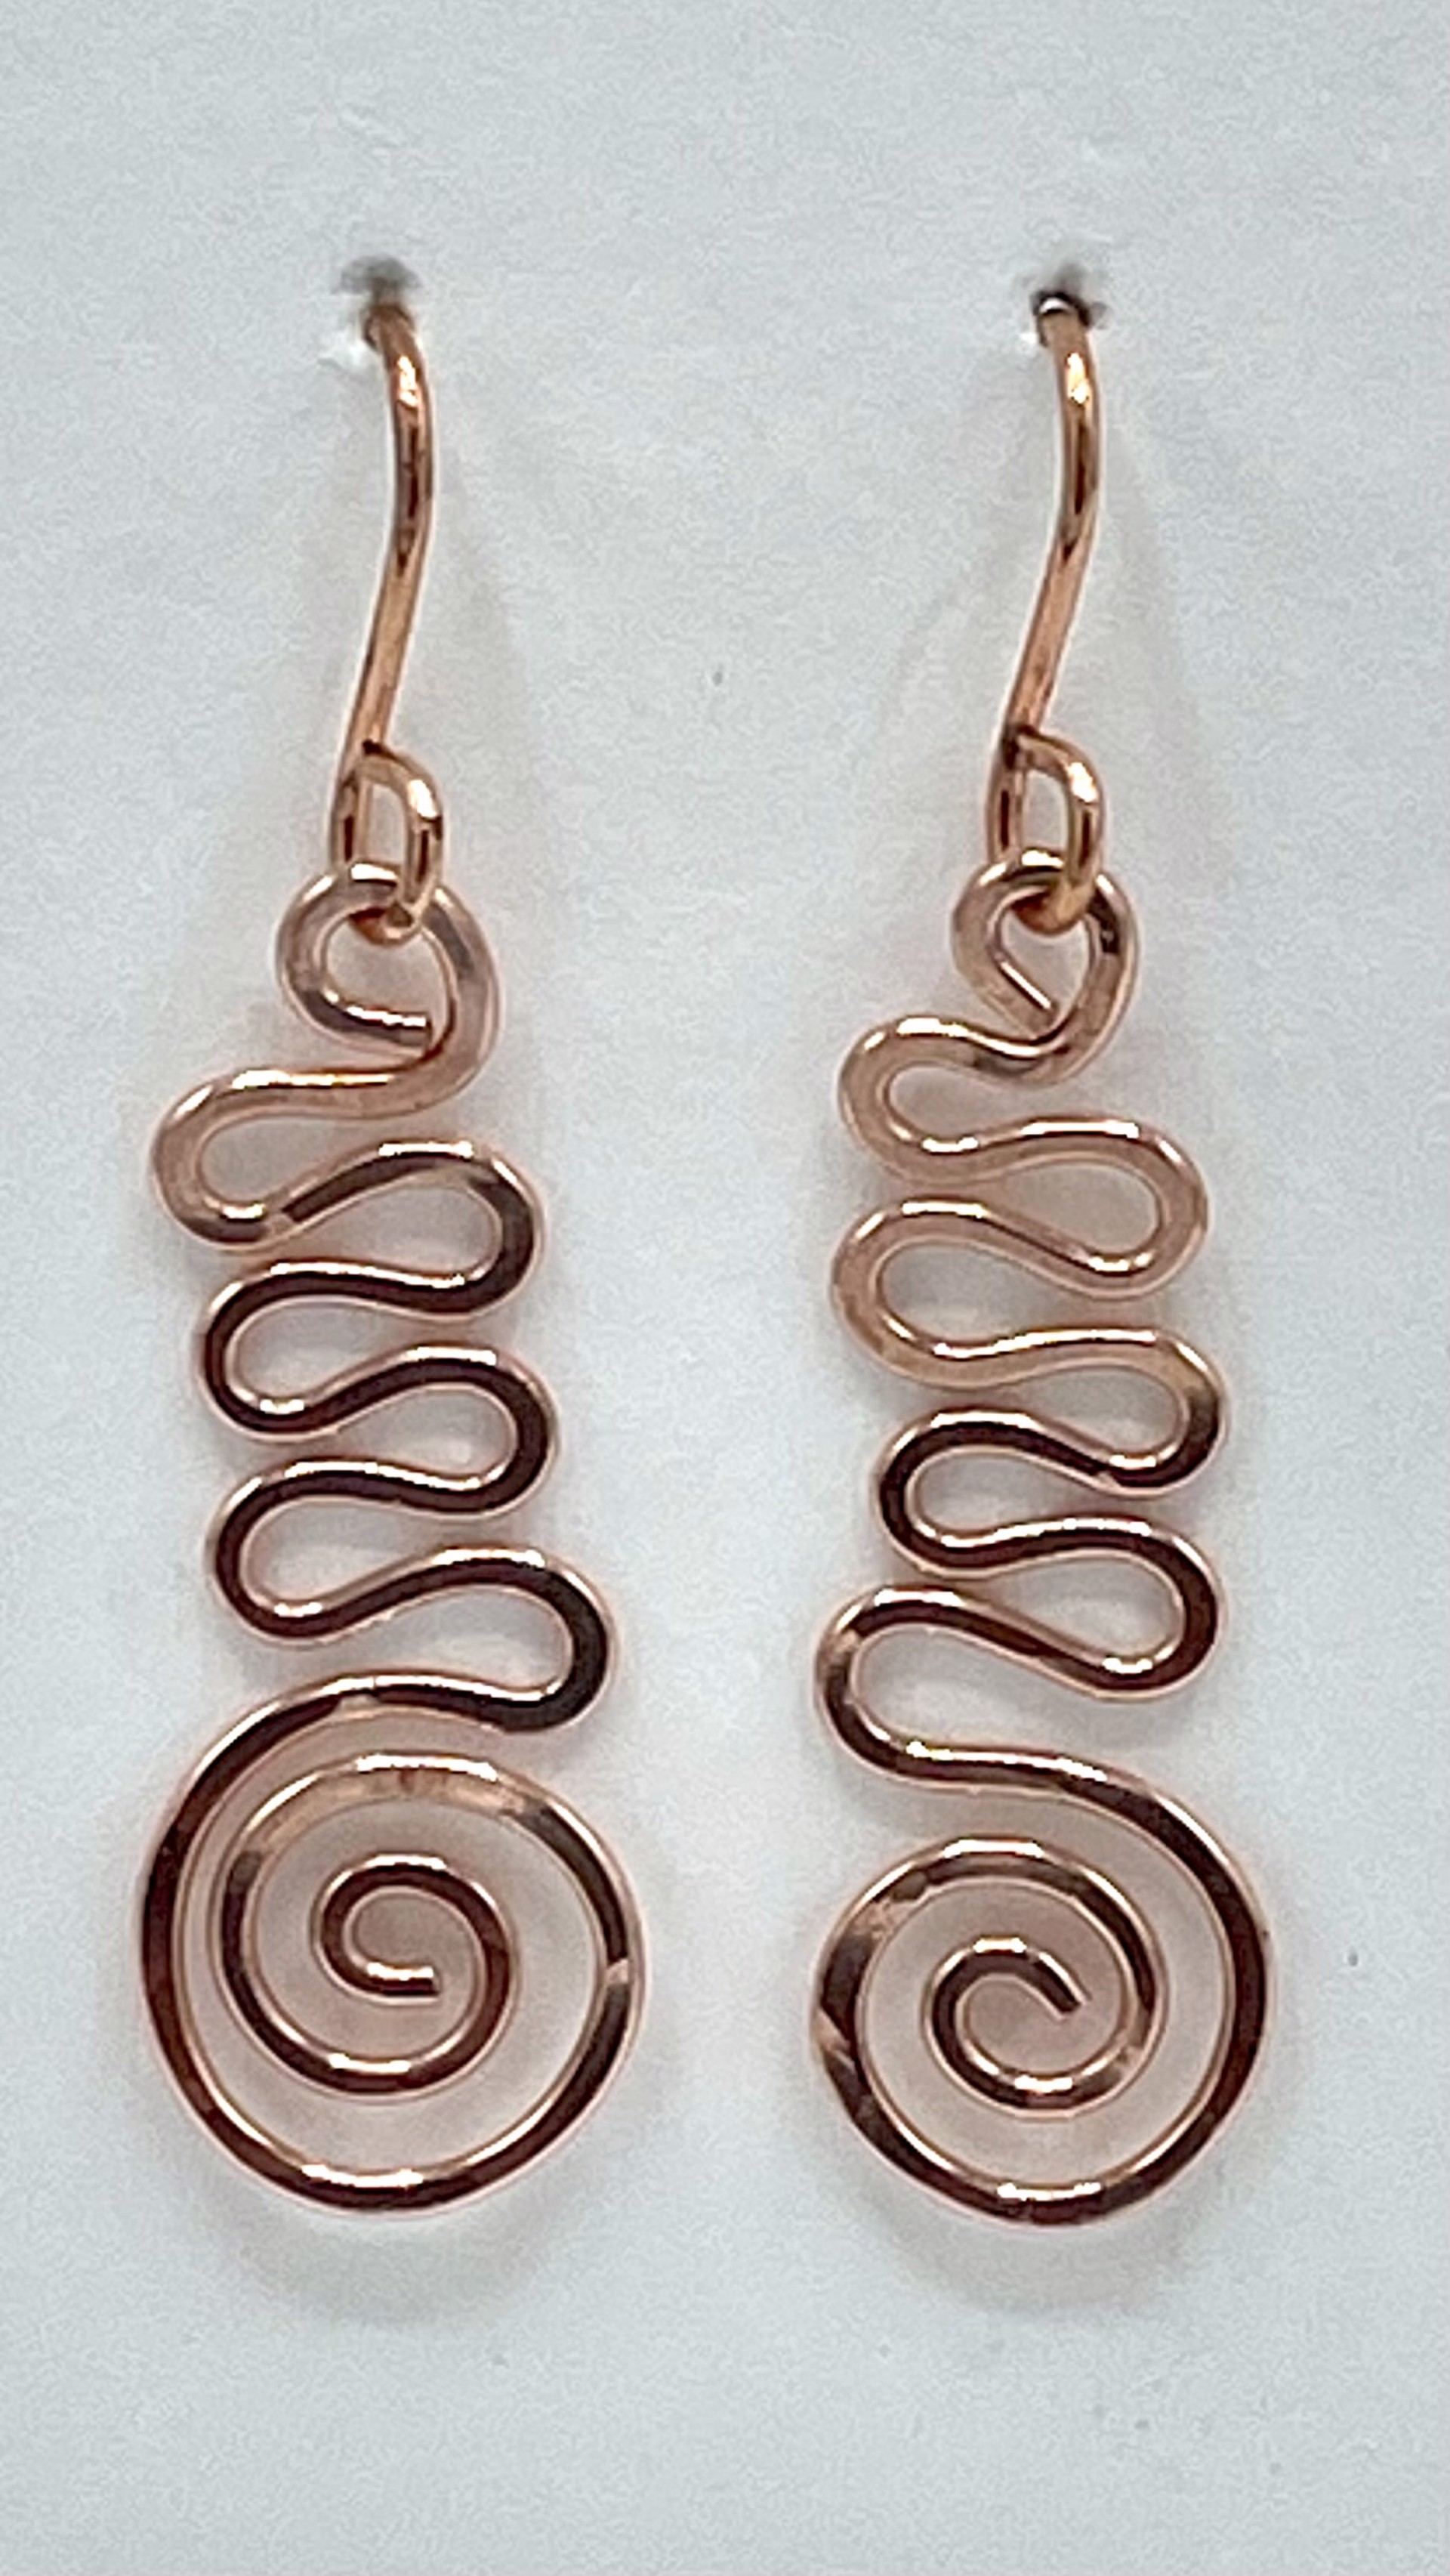 Copper Spiral with Squiggly Earrings by Emelie Hebert